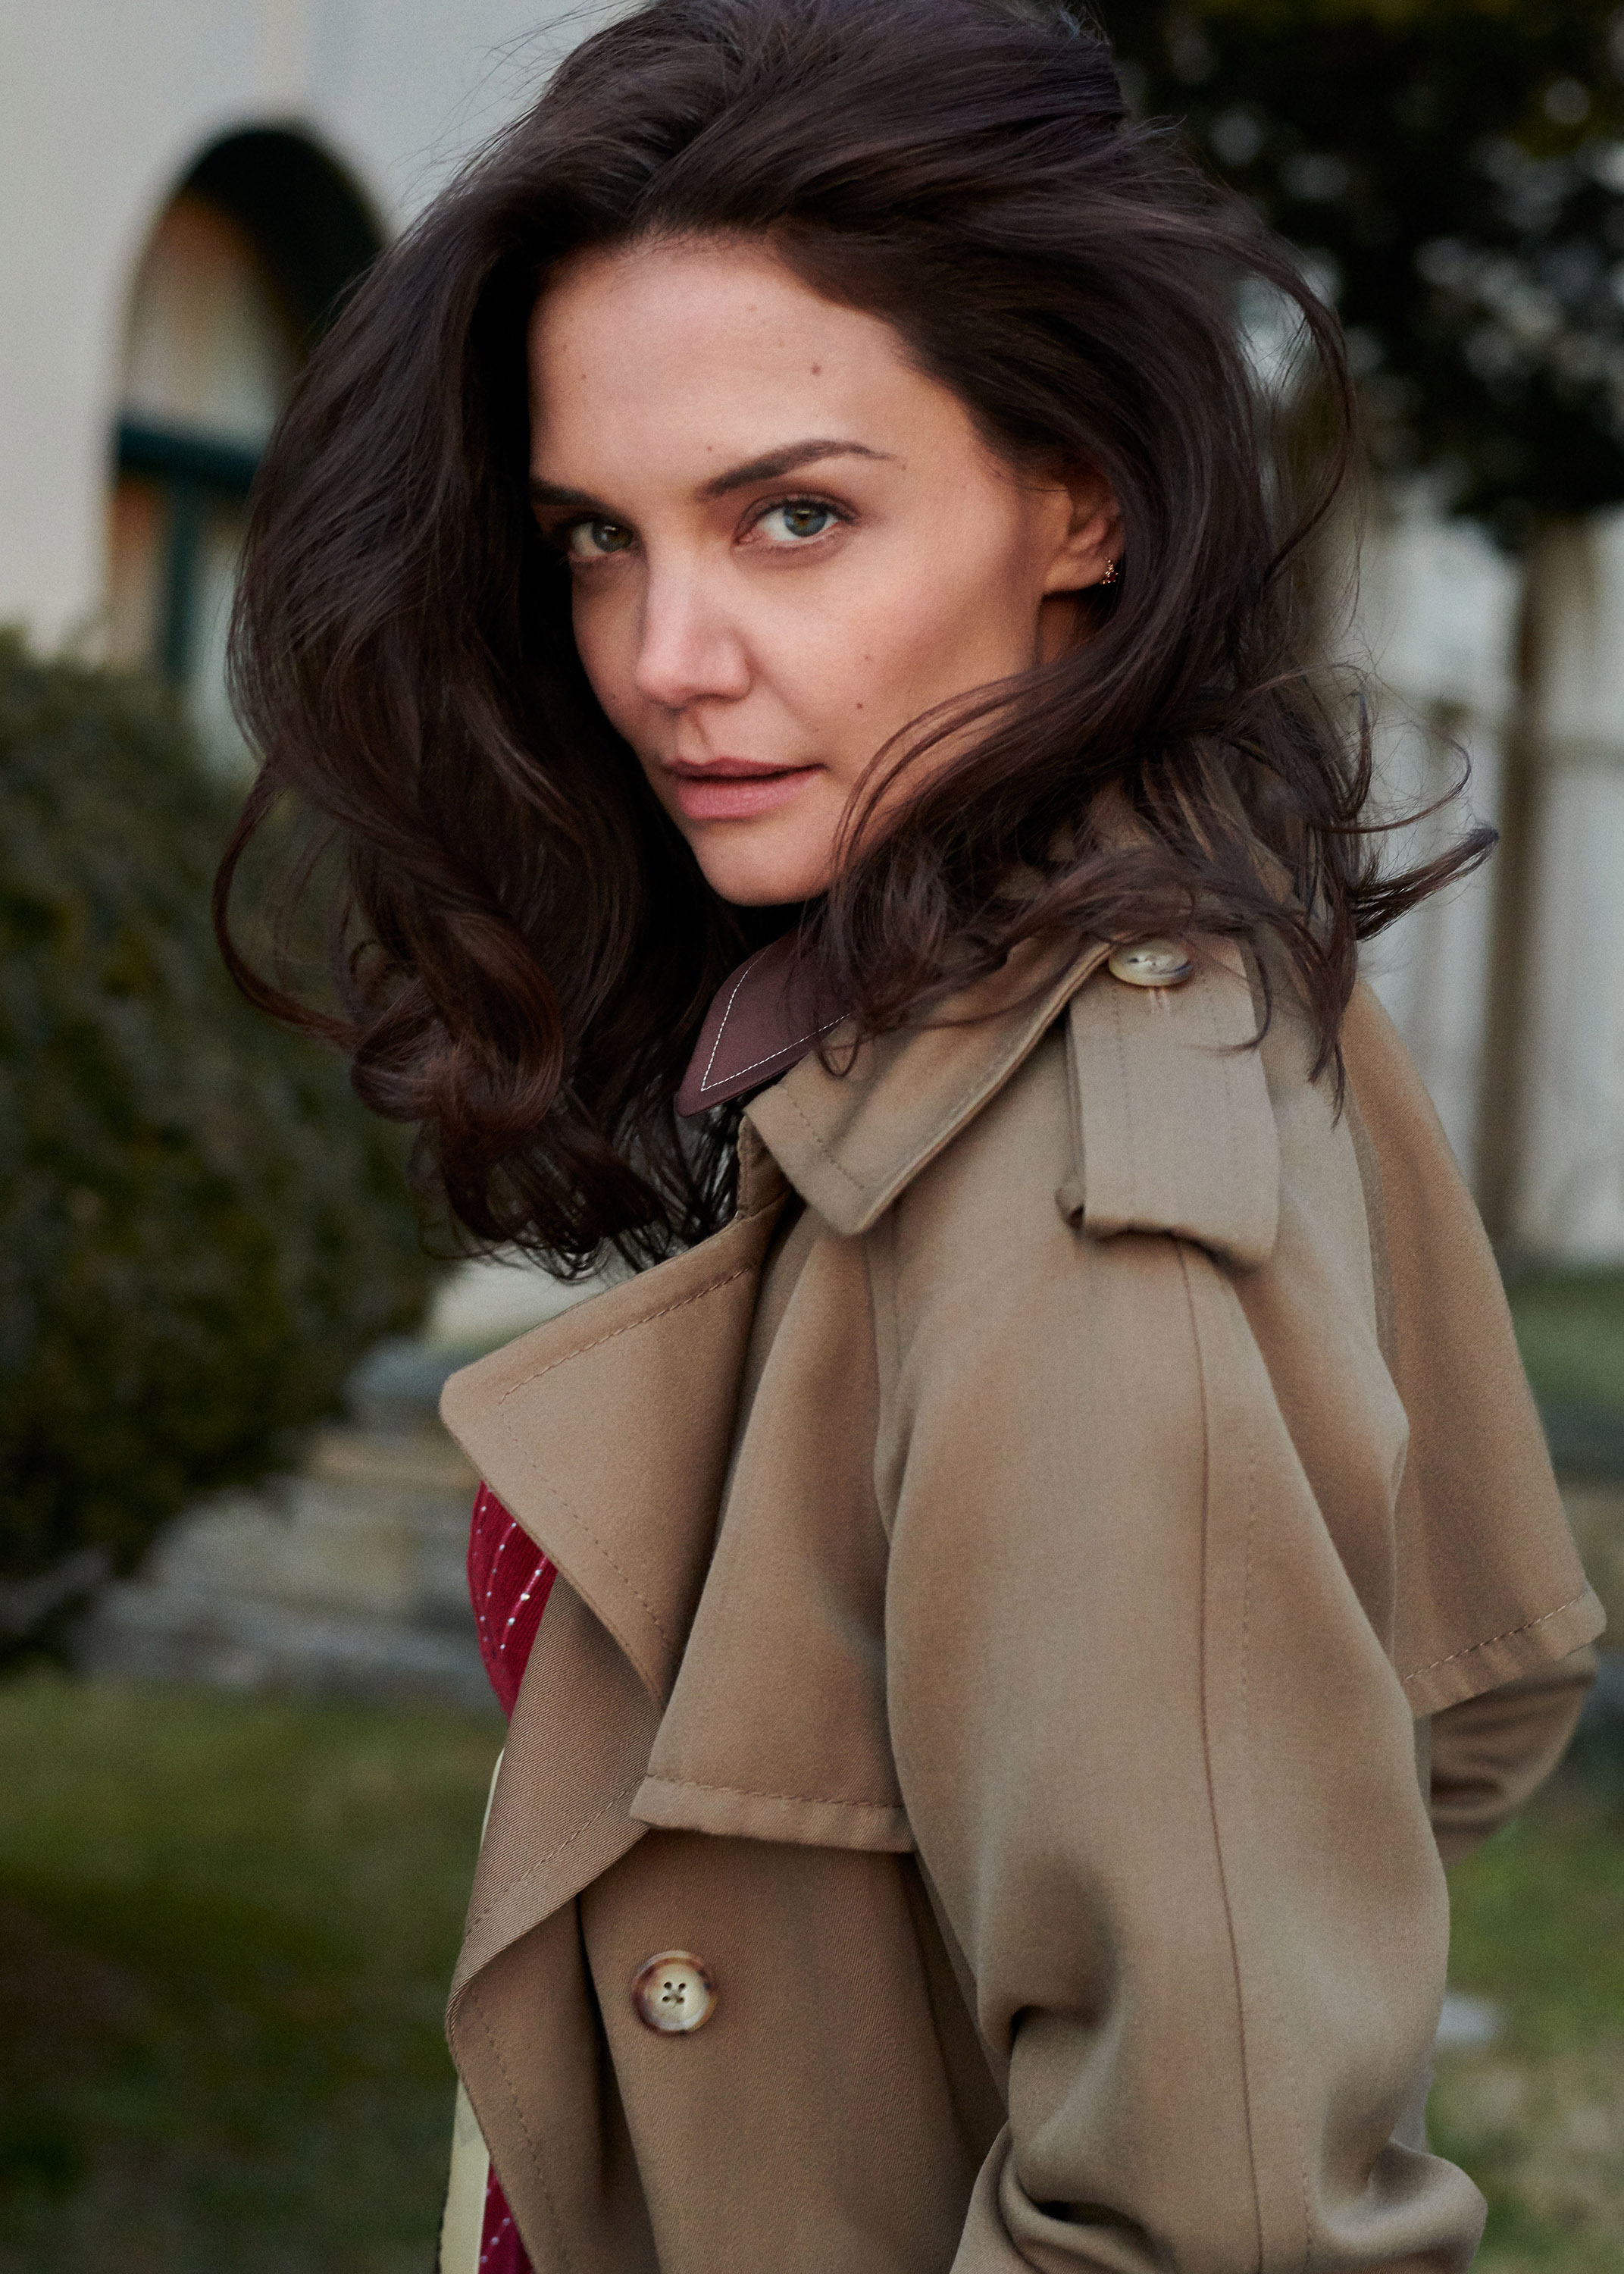 Photos n°8 : Katie Holmes Talks Rare Objects in a LBD